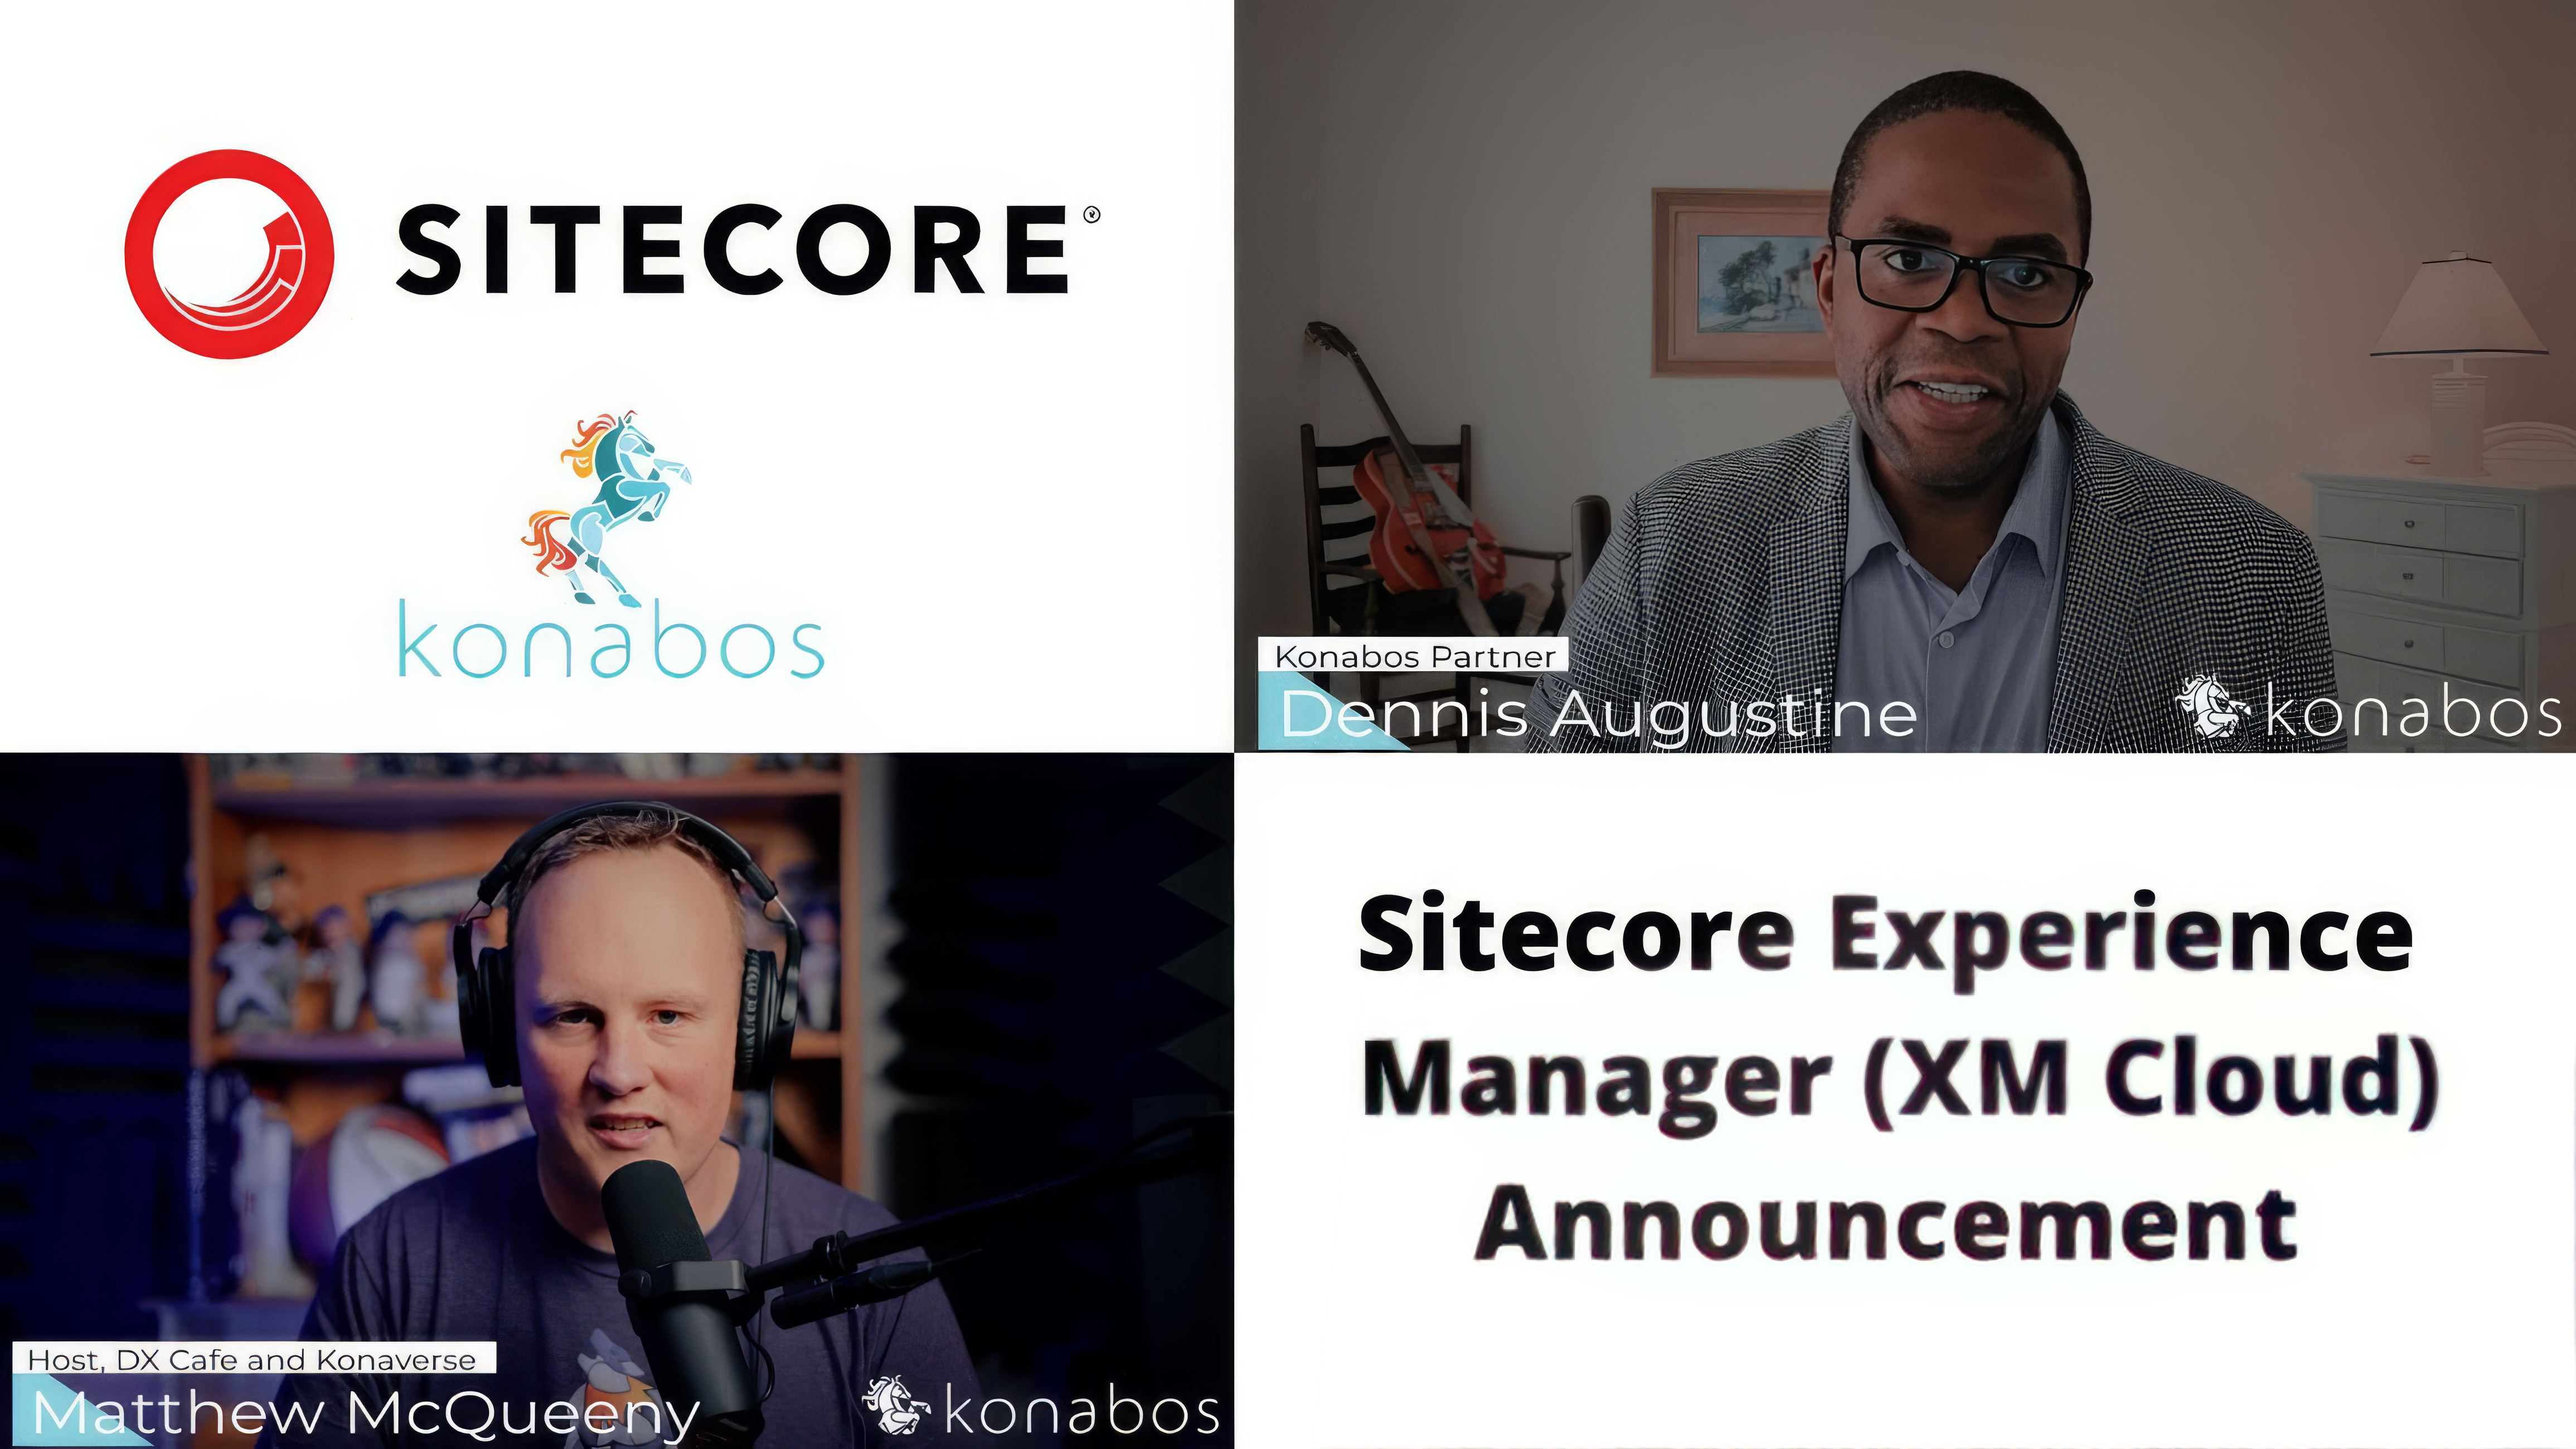 Sitecore Experience Manager Announcement